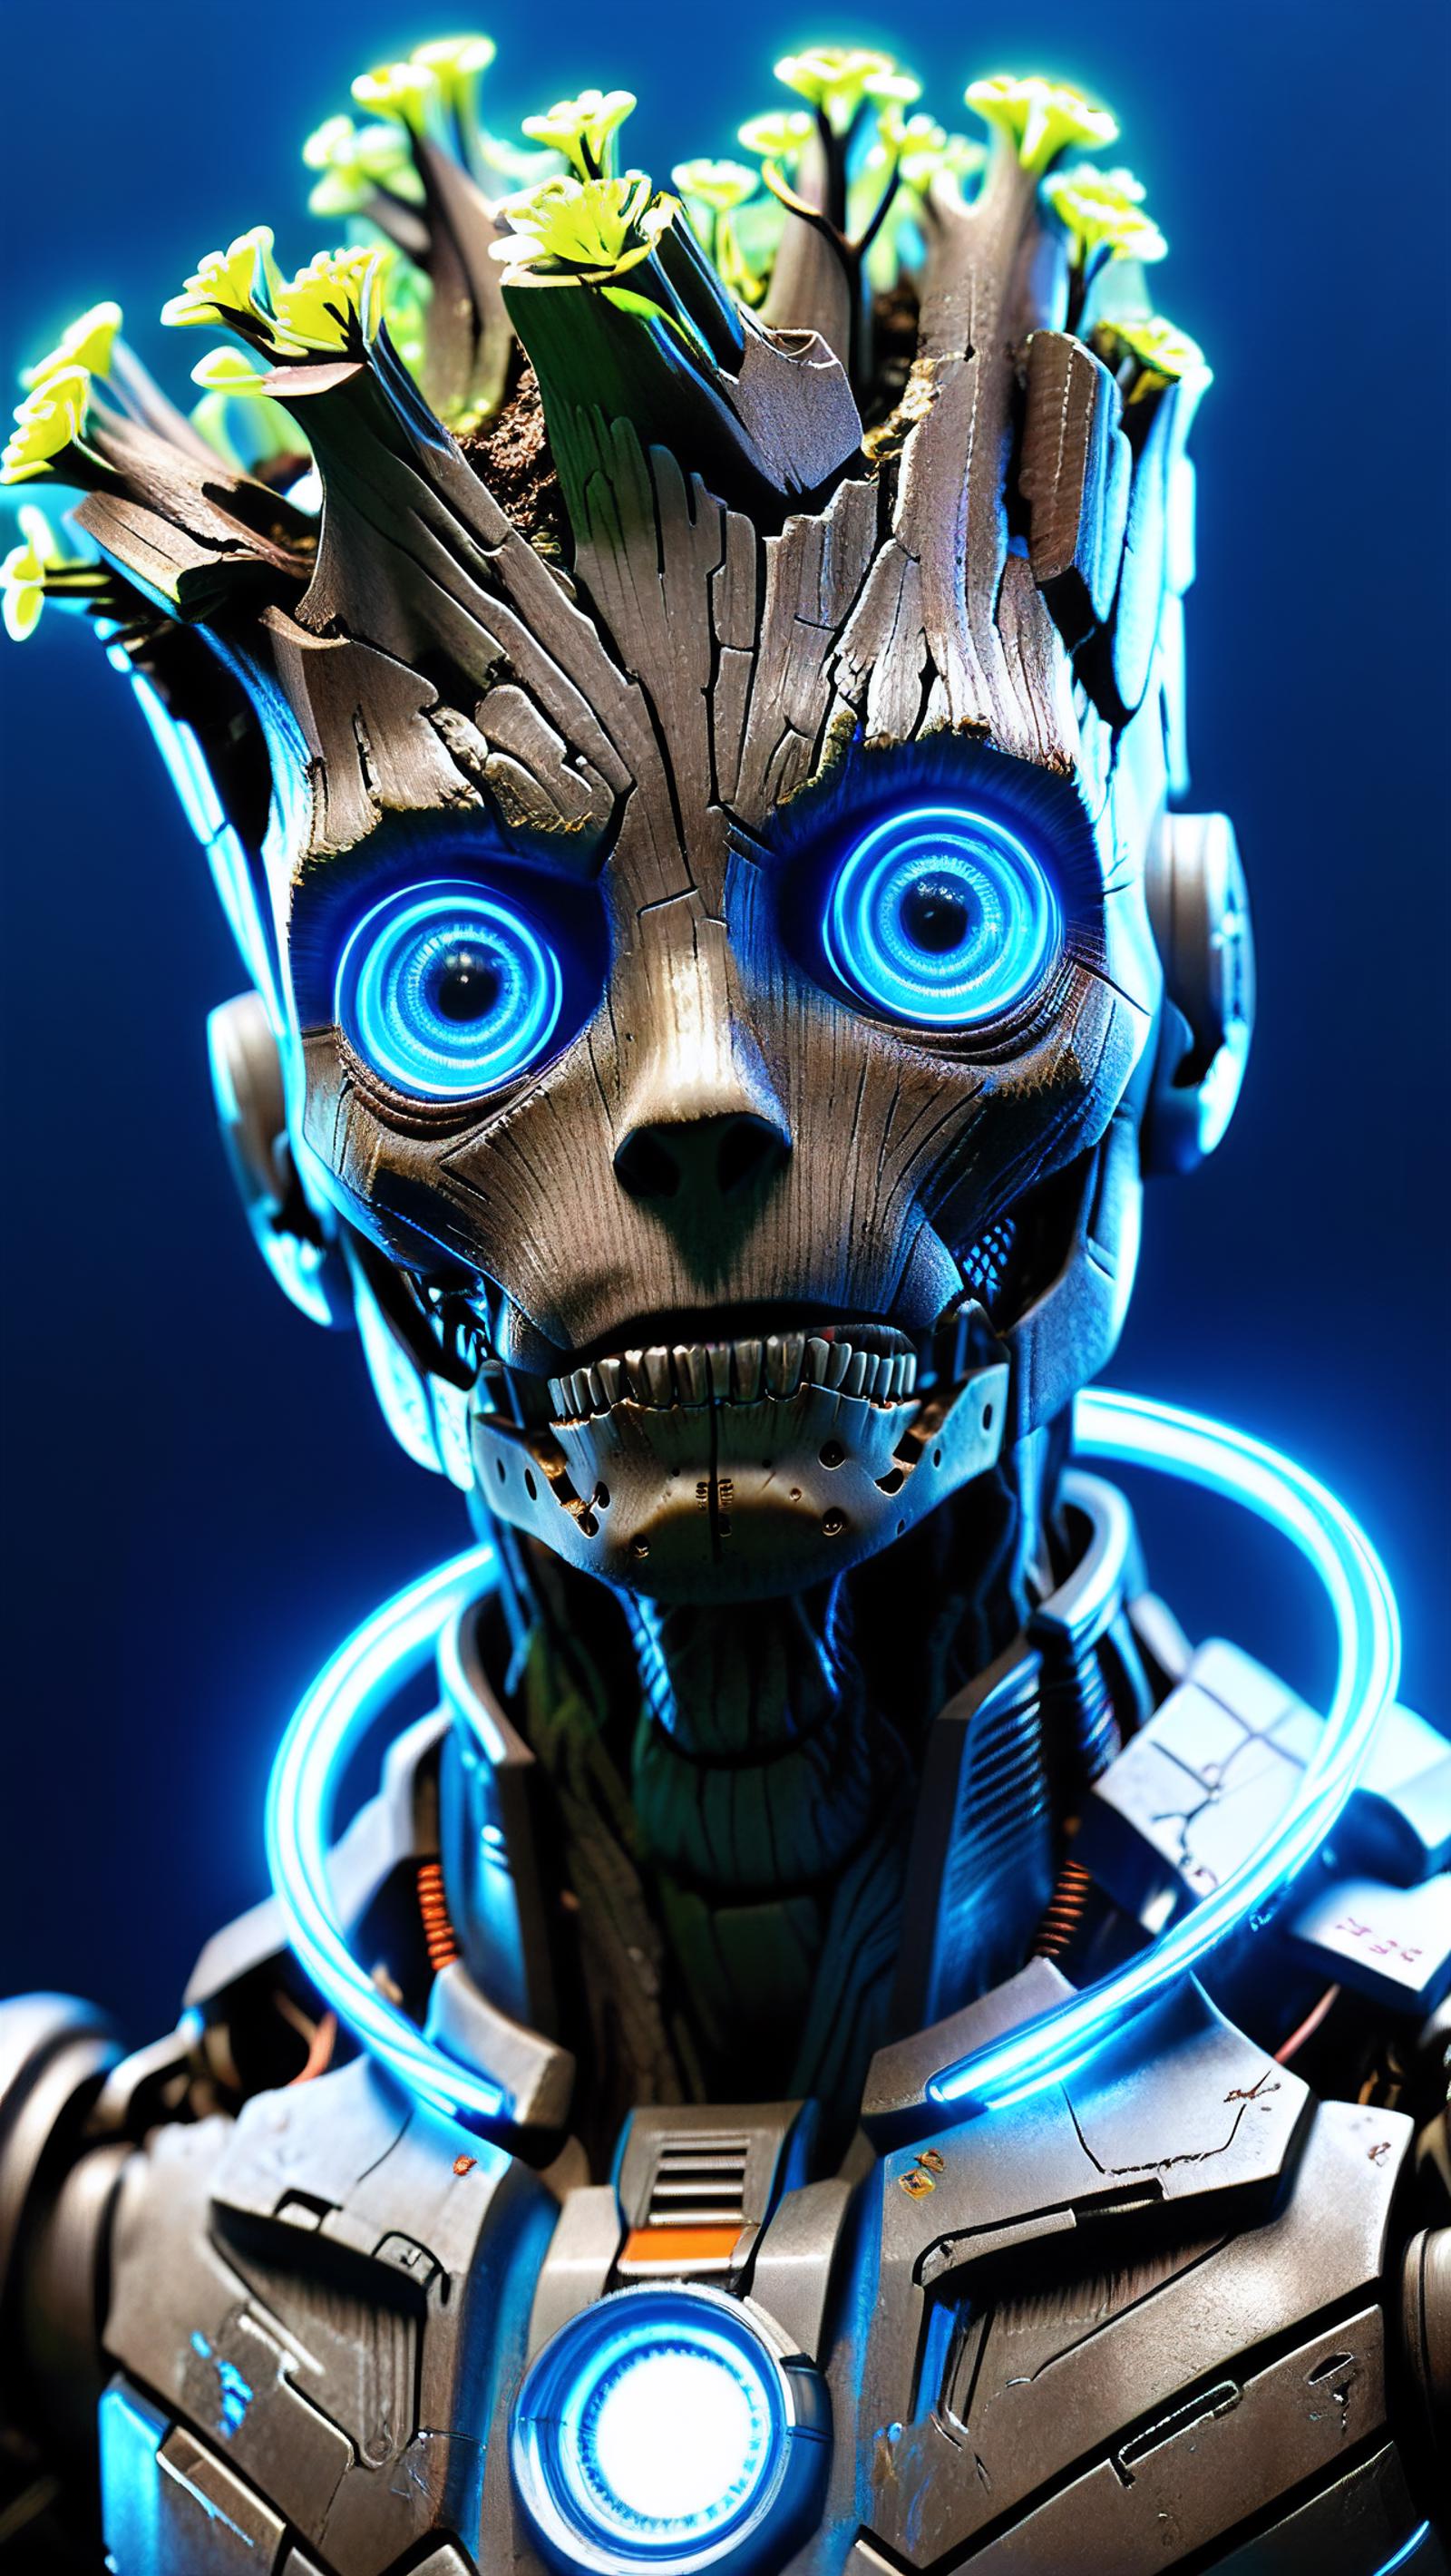 Blue-eyed robot head with a blue circle and glowing blue eyes.